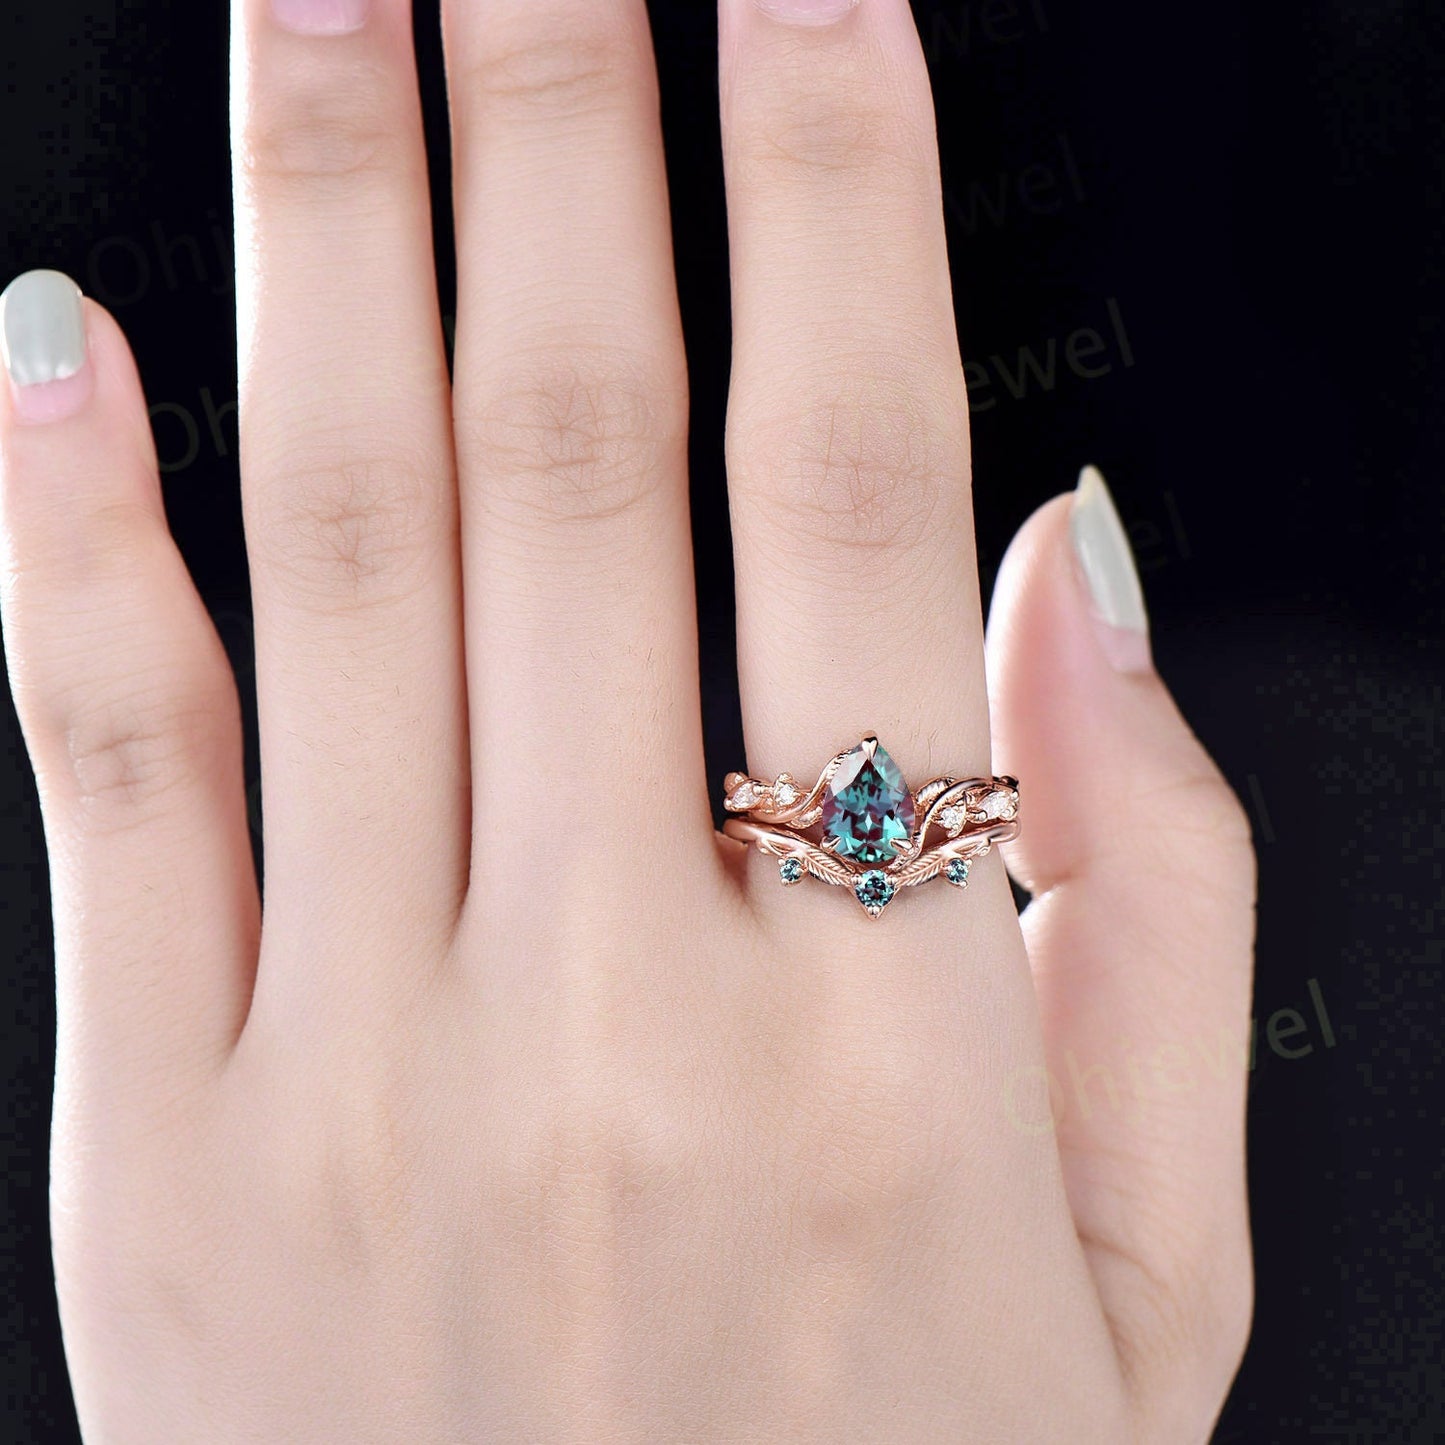 Twig pear shaped Alexandrite engagement ring five stone vintage branch leaf wedding ring set rose gold nature inspired diamond ring women